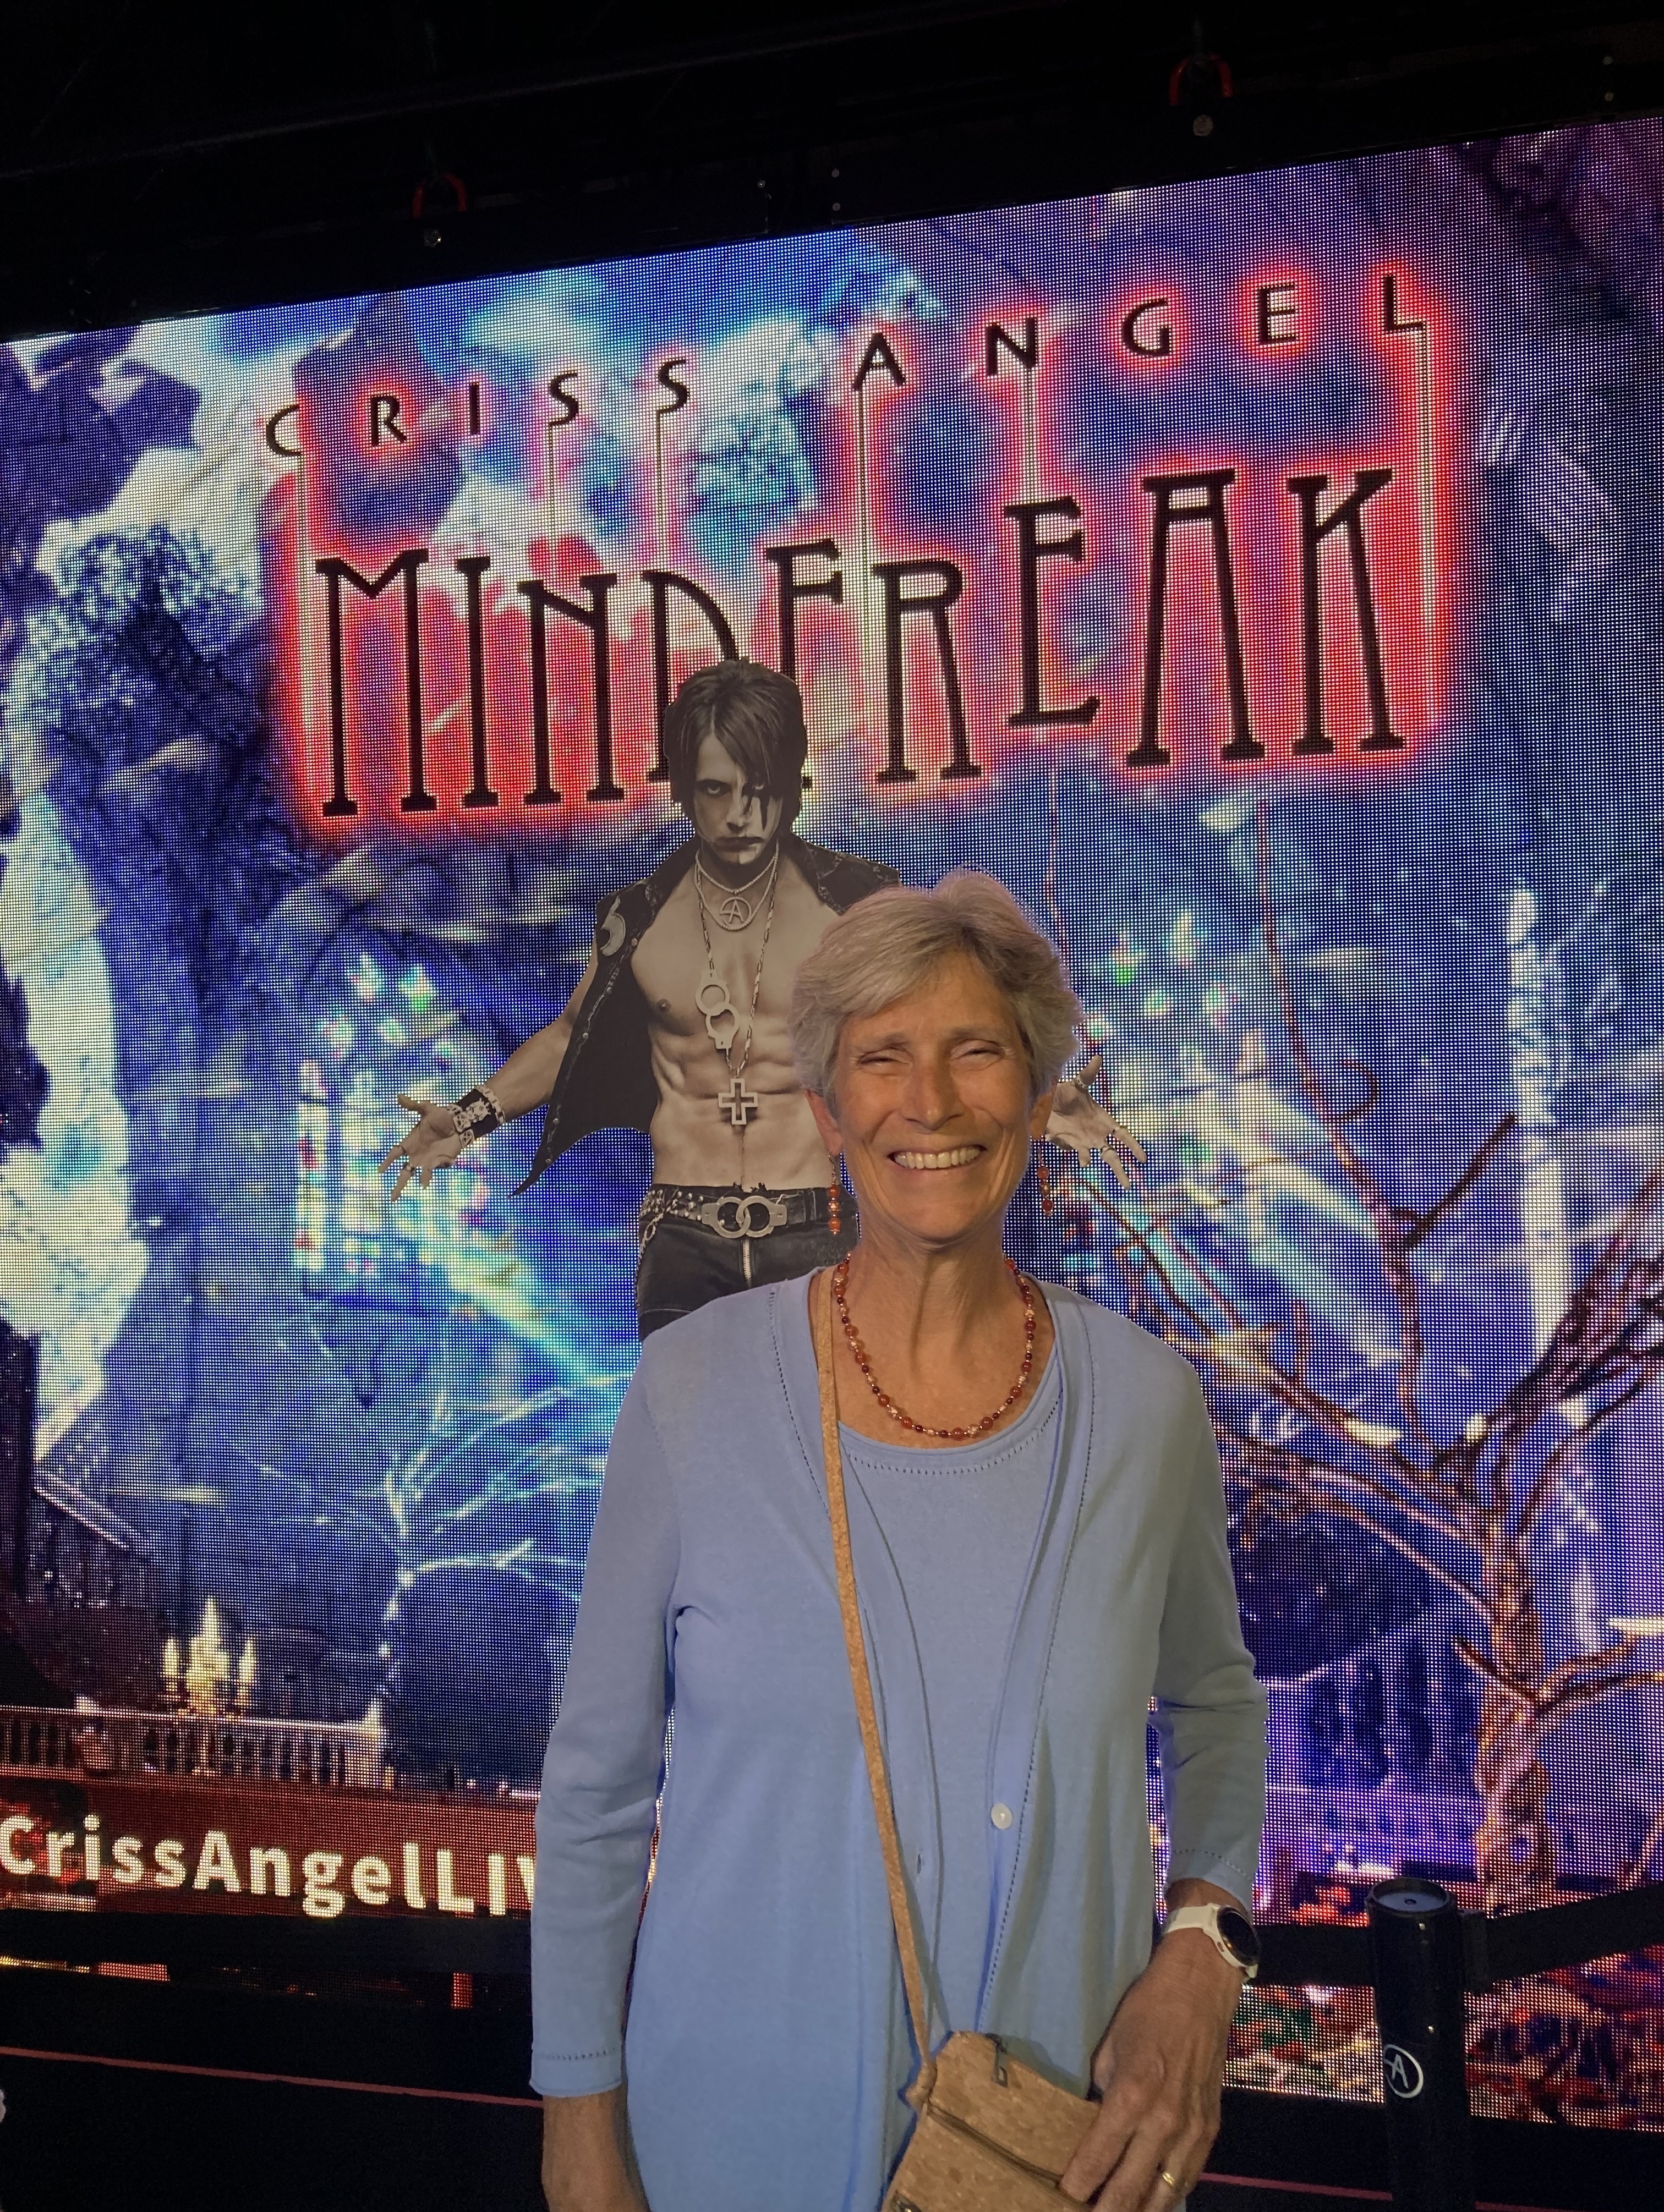 Criss Angel's Magic With the Stars - Televised Taping.